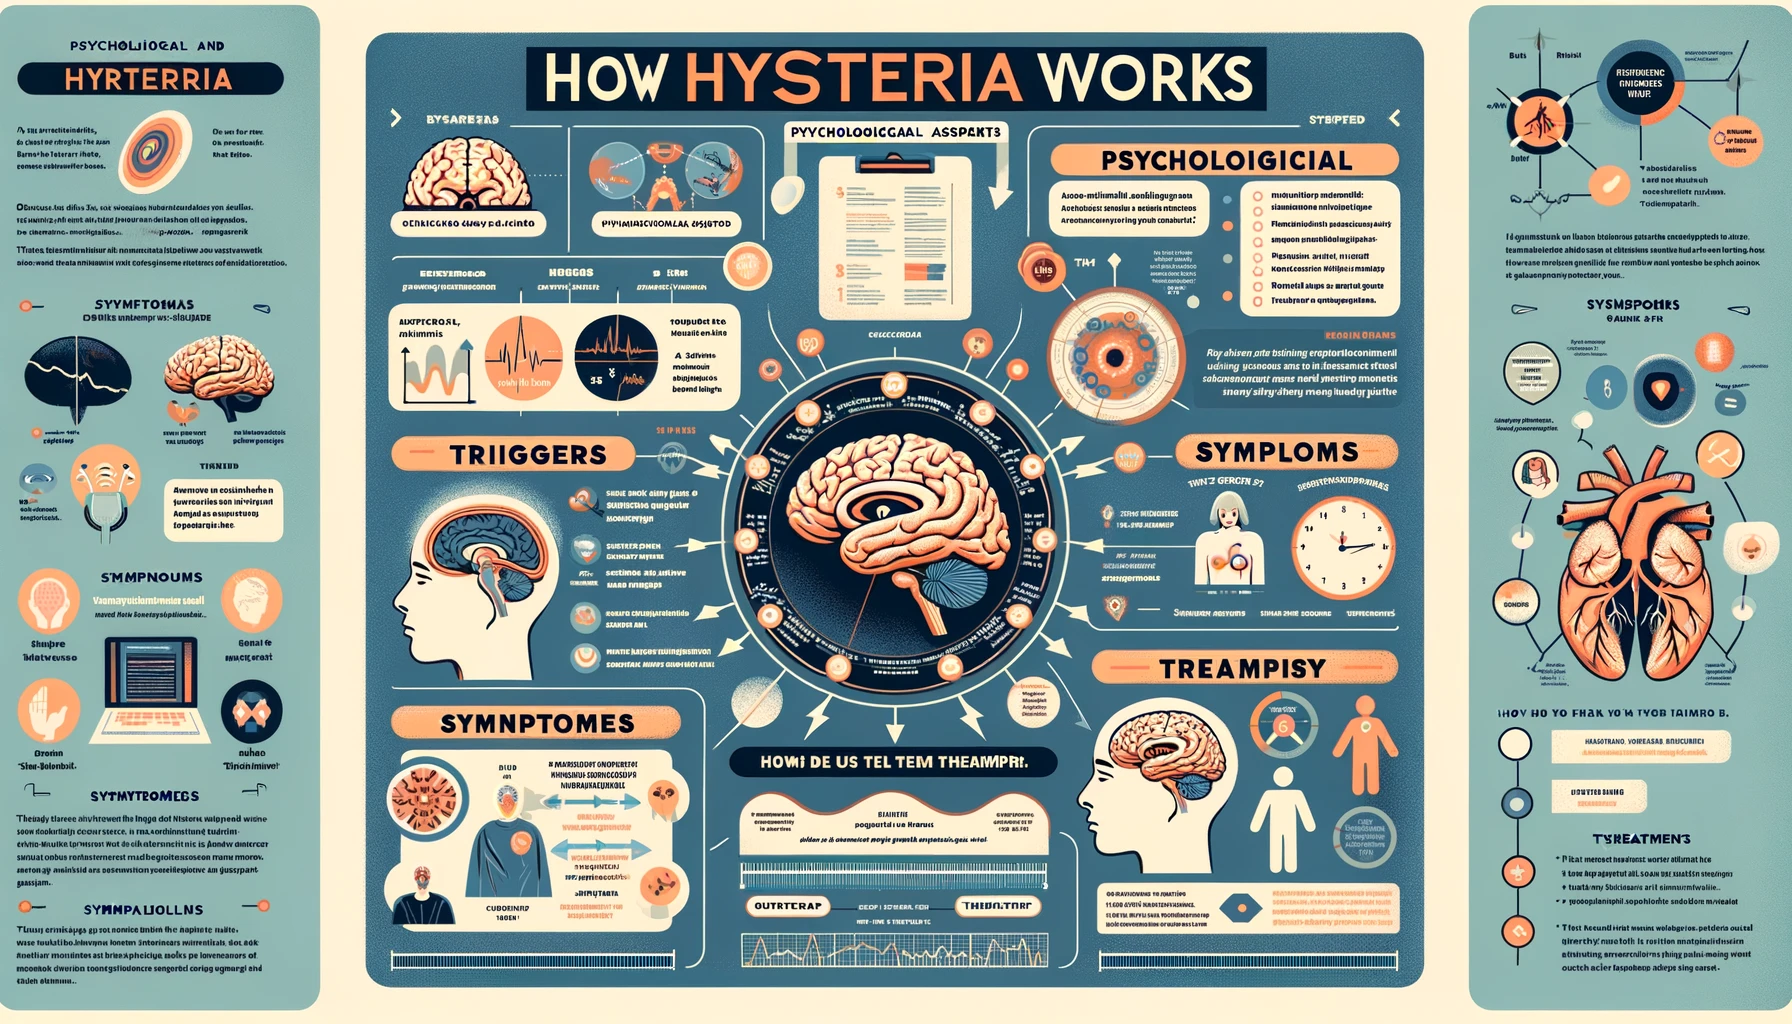 HOW Hysteria WORKS